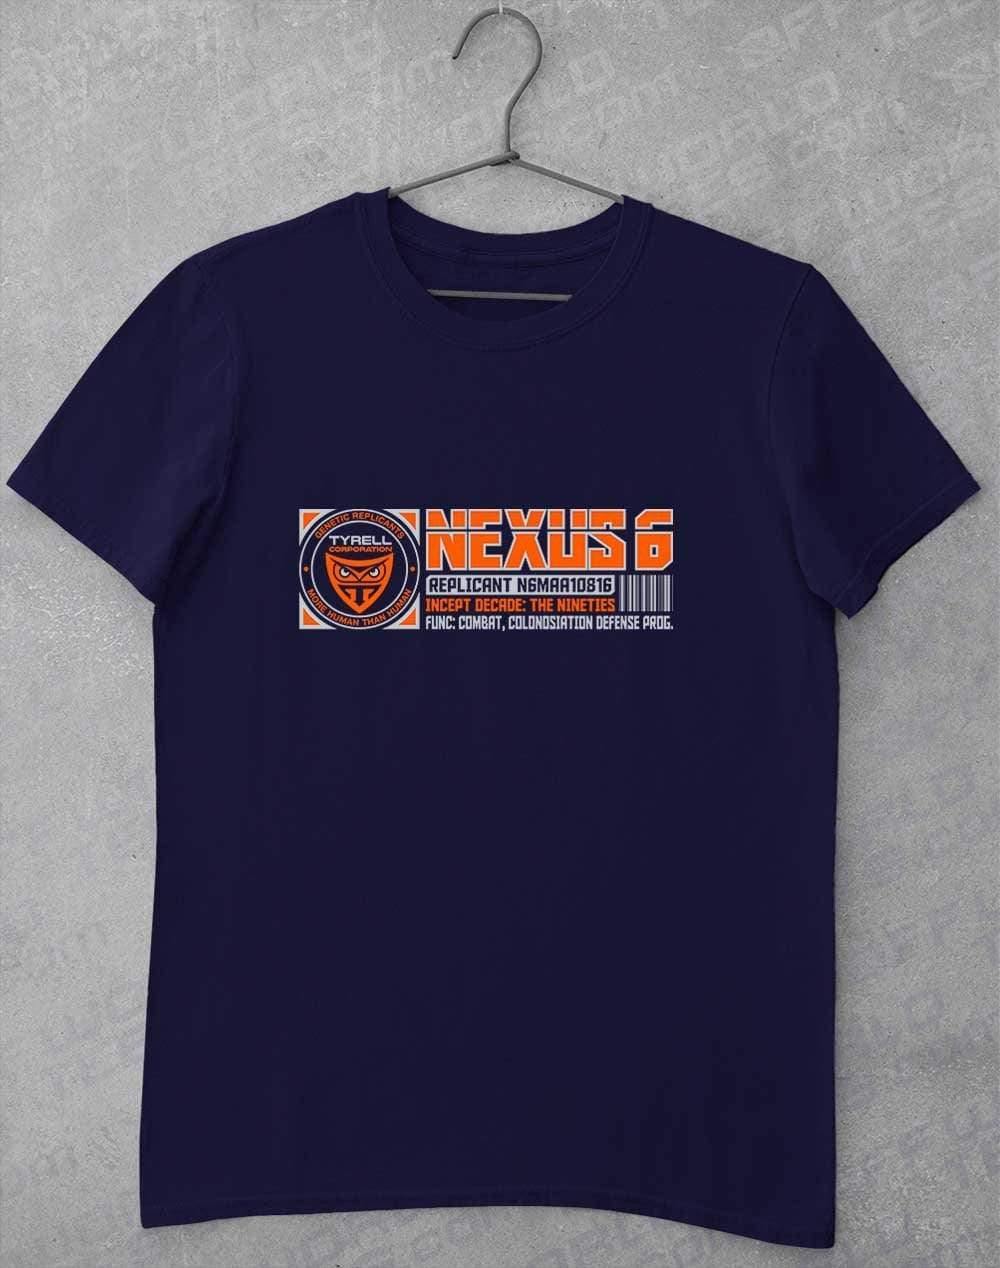 Nexus 6 Replicant Incept Date (CHOOSE YOUR DECADE!) T-Shirt The Nineties - Navy / S  - Off World Tees